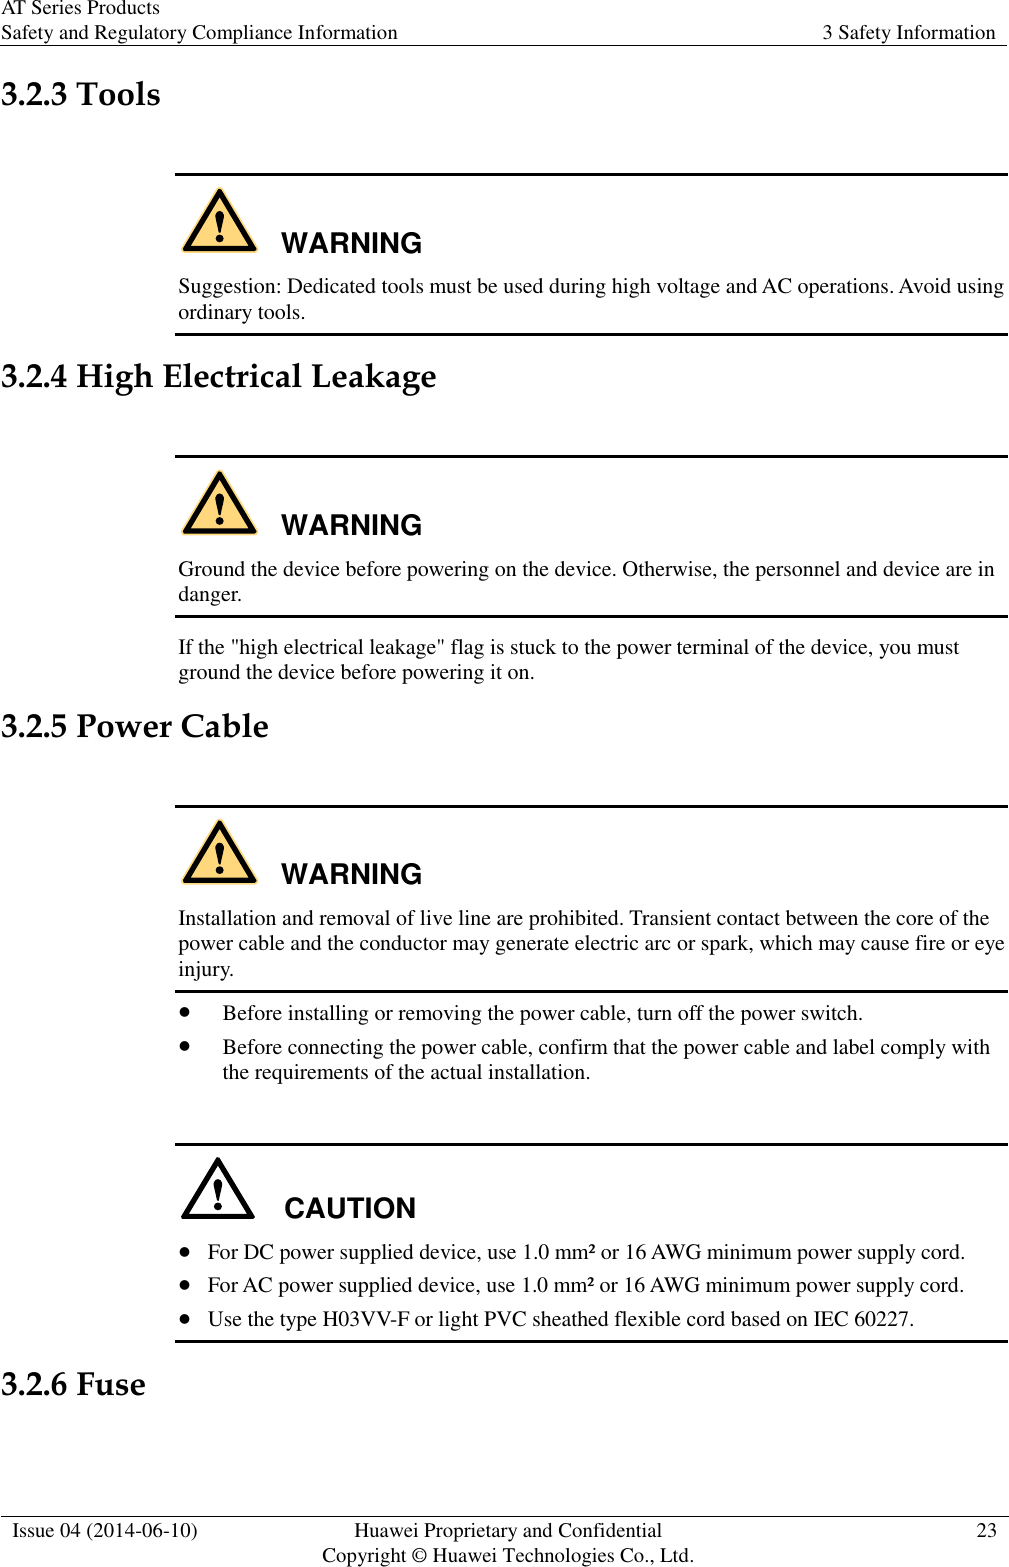 AT Series Products Safety and Regulatory Compliance Information 3 Safety Information  Issue 04 (2014-06-10) Huawei Proprietary and Confidential           Copyright © Huawei Technologies Co., Ltd. 23  3.2.3 Tools  WARNING Suggestion: Dedicated tools must be used during high voltage and AC operations. Avoid using ordinary tools. 3.2.4 High Electrical Leakage  WARNING Ground the device before powering on the device. Otherwise, the personnel and device are in danger. If the &quot;high electrical leakage&quot; flag is stuck to the power terminal of the device, you must ground the device before powering it on. 3.2.5 Power Cable  WARNING Installation and removal of live line are prohibited. Transient contact between the core of the power cable and the conductor may generate electric arc or spark, which may cause fire or eye injury.  Before installing or removing the power cable, turn off the power switch.  Before connecting the power cable, confirm that the power cable and label comply with the requirements of the actual installation.  CAUTION  For DC power supplied device, use 1.0 mm² or 16 AWG minimum power supply cord.  For AC power supplied device, use 1.0 mm² or 16 AWG minimum power supply cord.  Use the type H03VV-F or light PVC sheathed flexible cord based on IEC 60227. 3.2.6 Fuse  